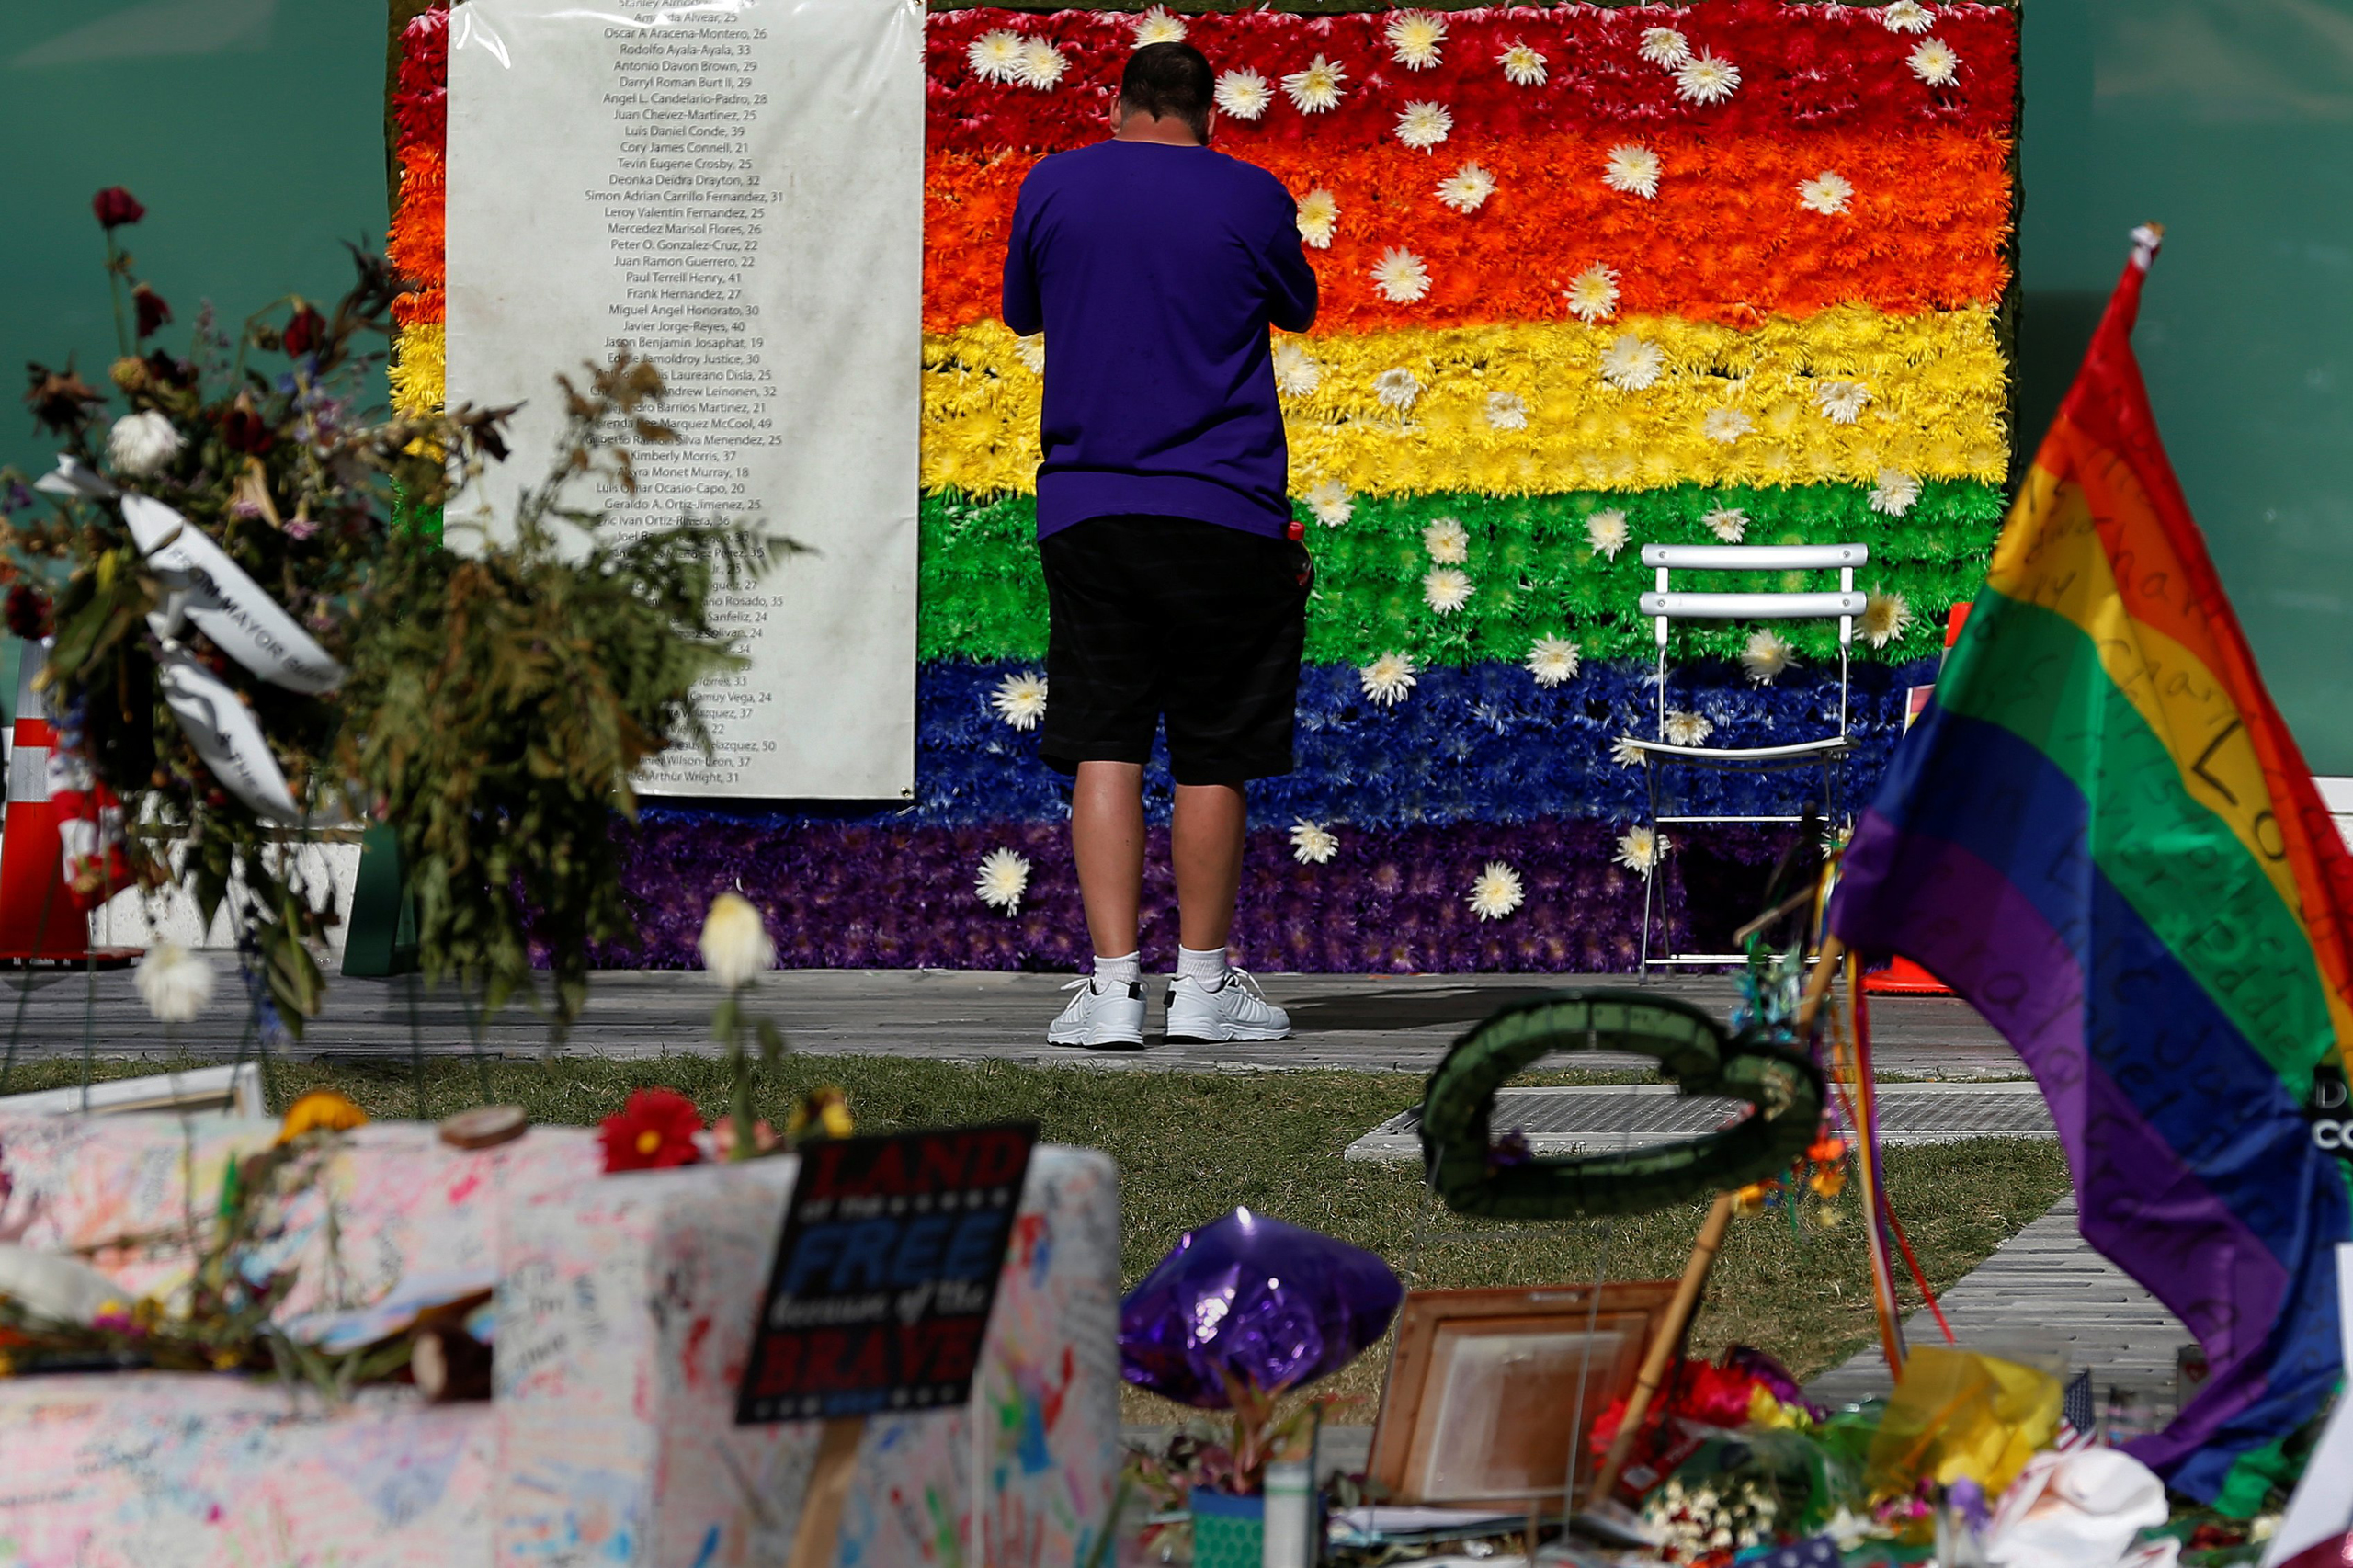 A man pays respect at a rainbow flower wall as part of the makeshift memorial for the Pulse nightclub mass shooting victims last week in Orlando, on June 21, 2016. (Carlo Allegri—Reuters)